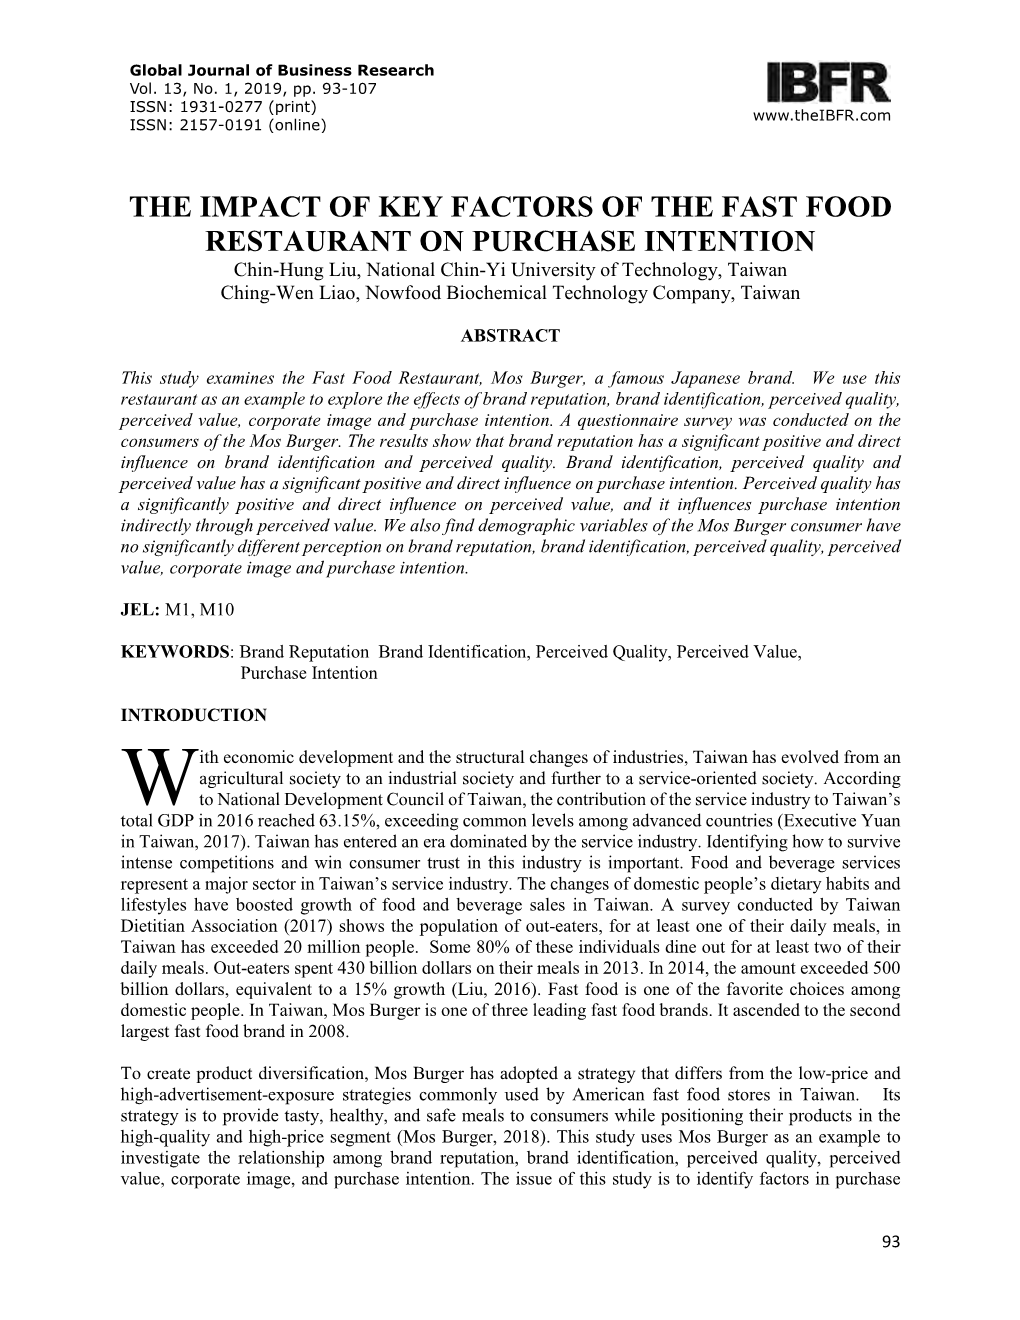 The Impact of Key Factors of the Fast Food Restaurant on Purchase Intention